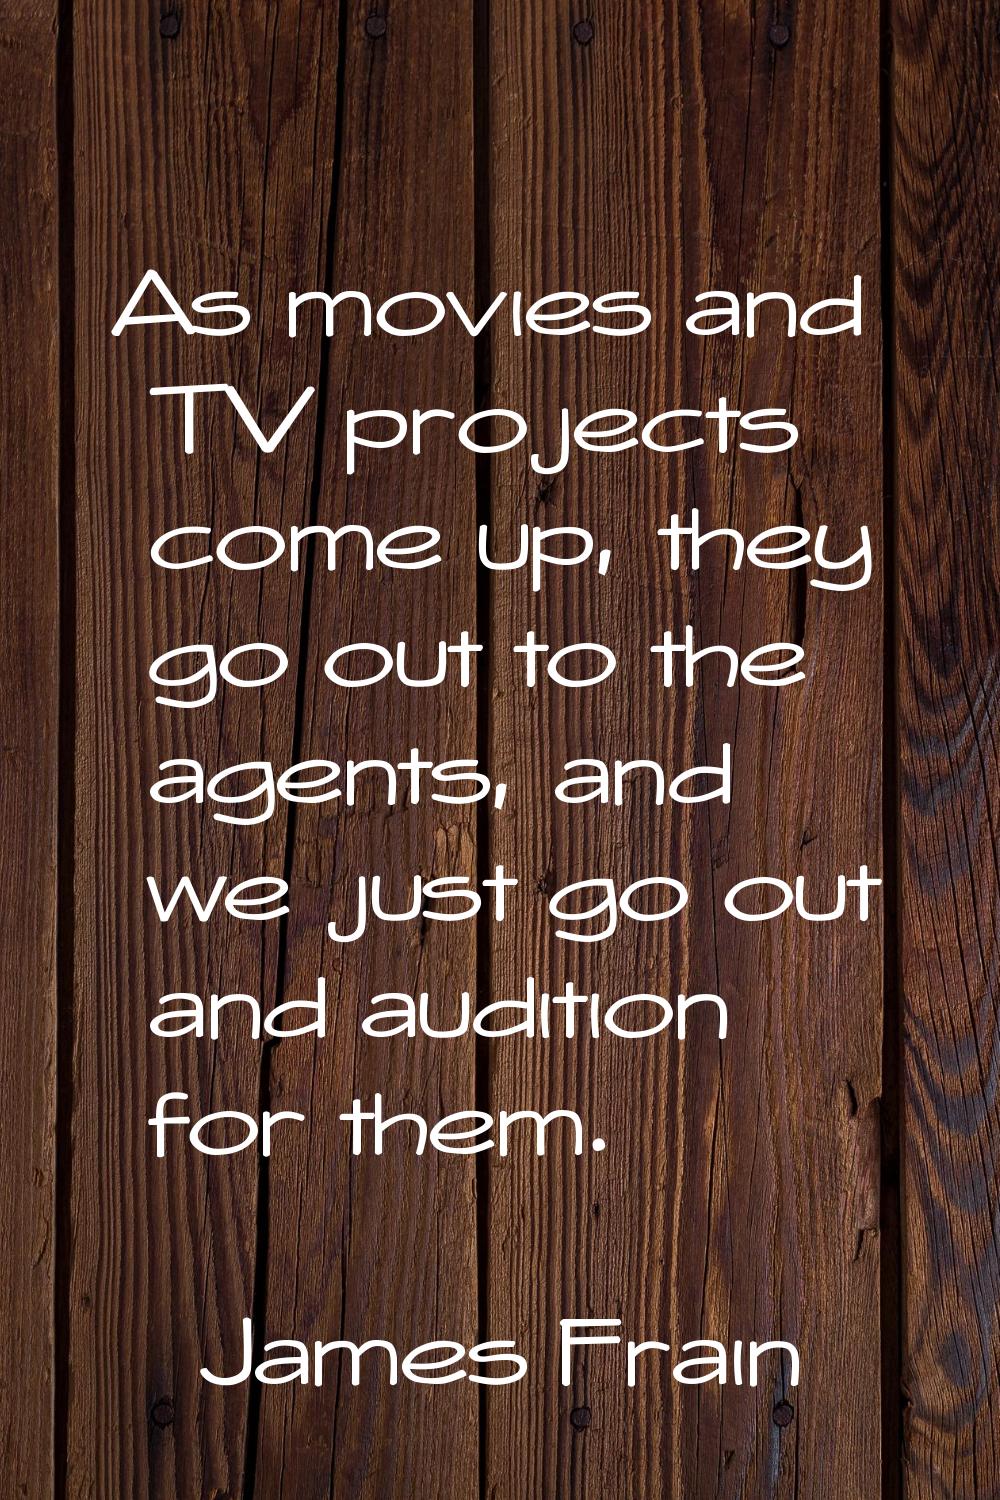 As movies and TV projects come up, they go out to the agents, and we just go out and audition for t